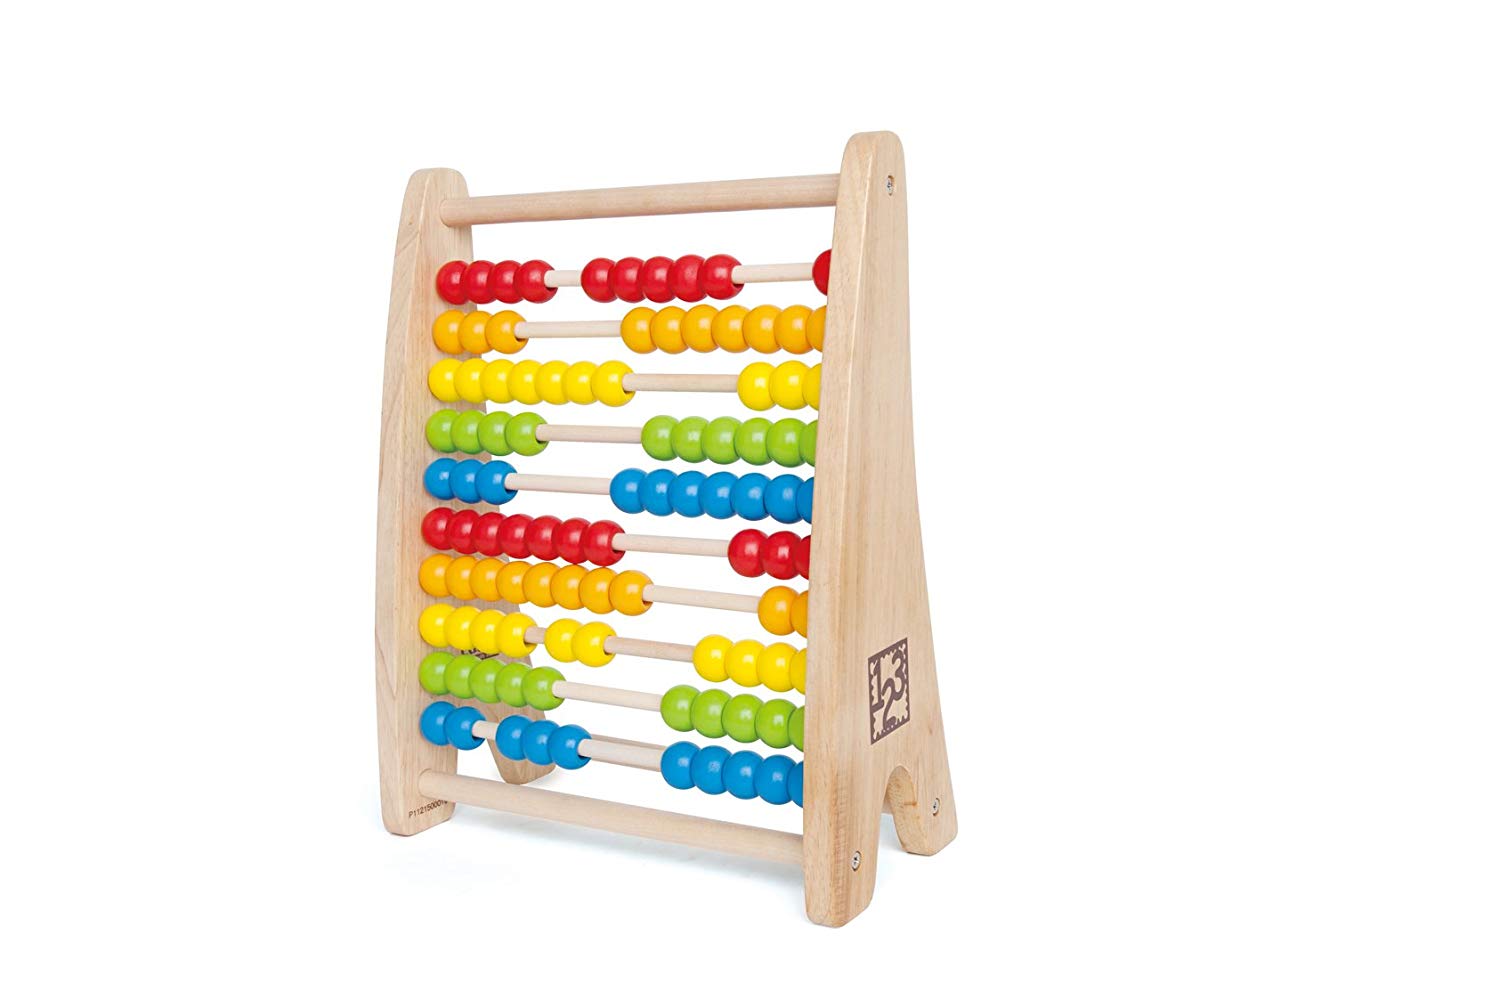 Hape Rainbow Abacus Counting Frame E Beleduc Educational Products Gmbh